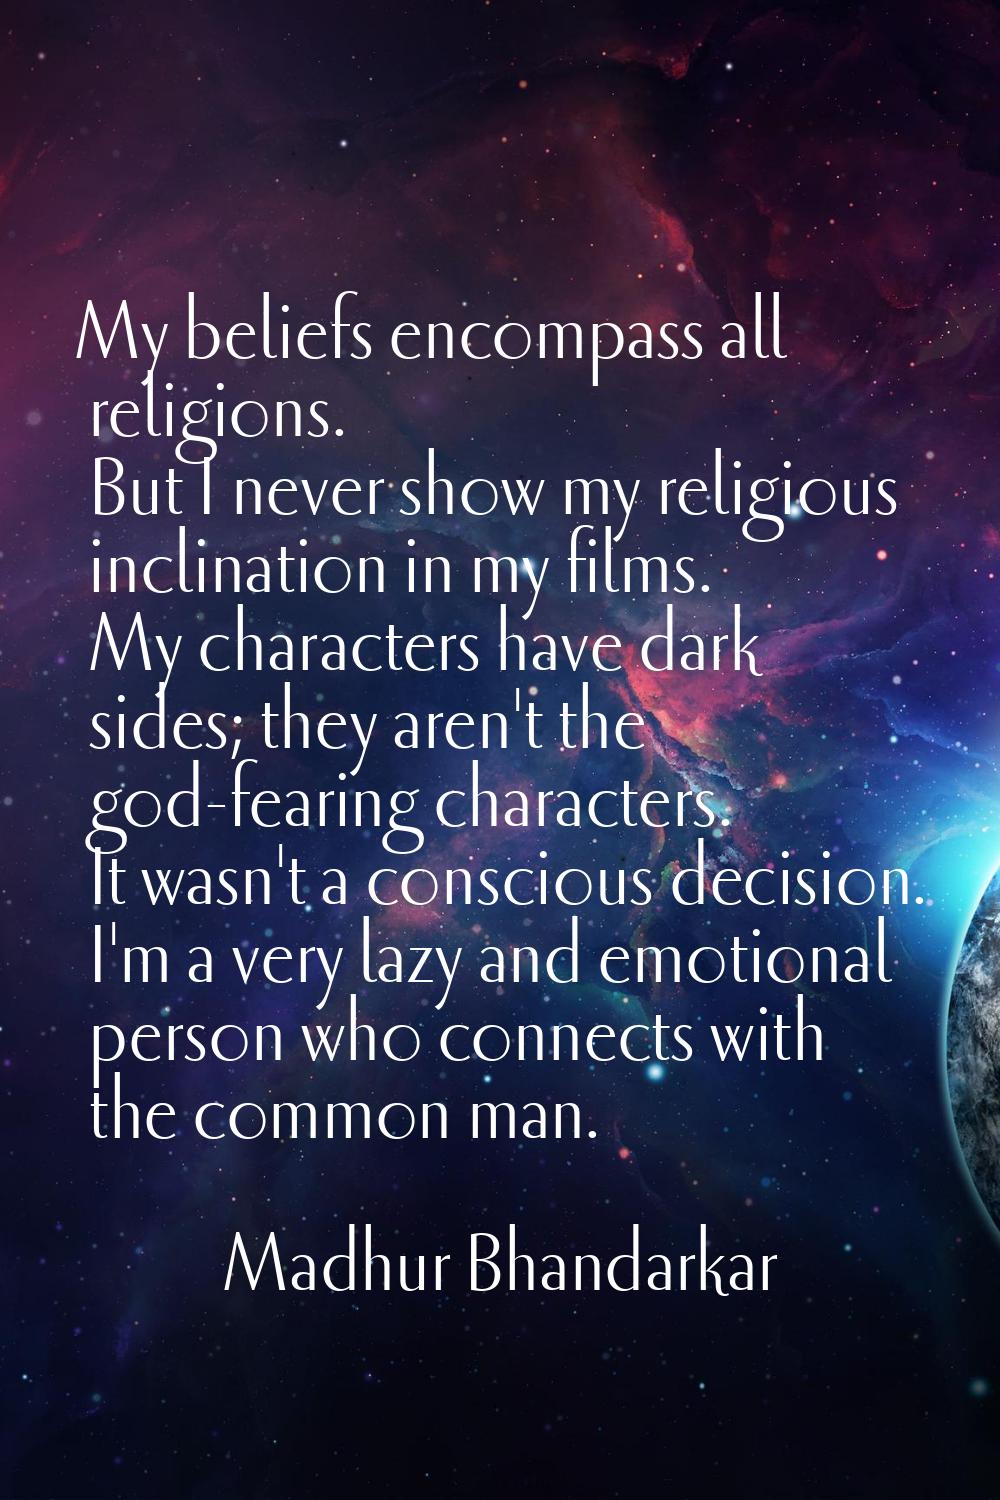 My beliefs encompass all religions. But I never show my religious inclination in my films. My chara